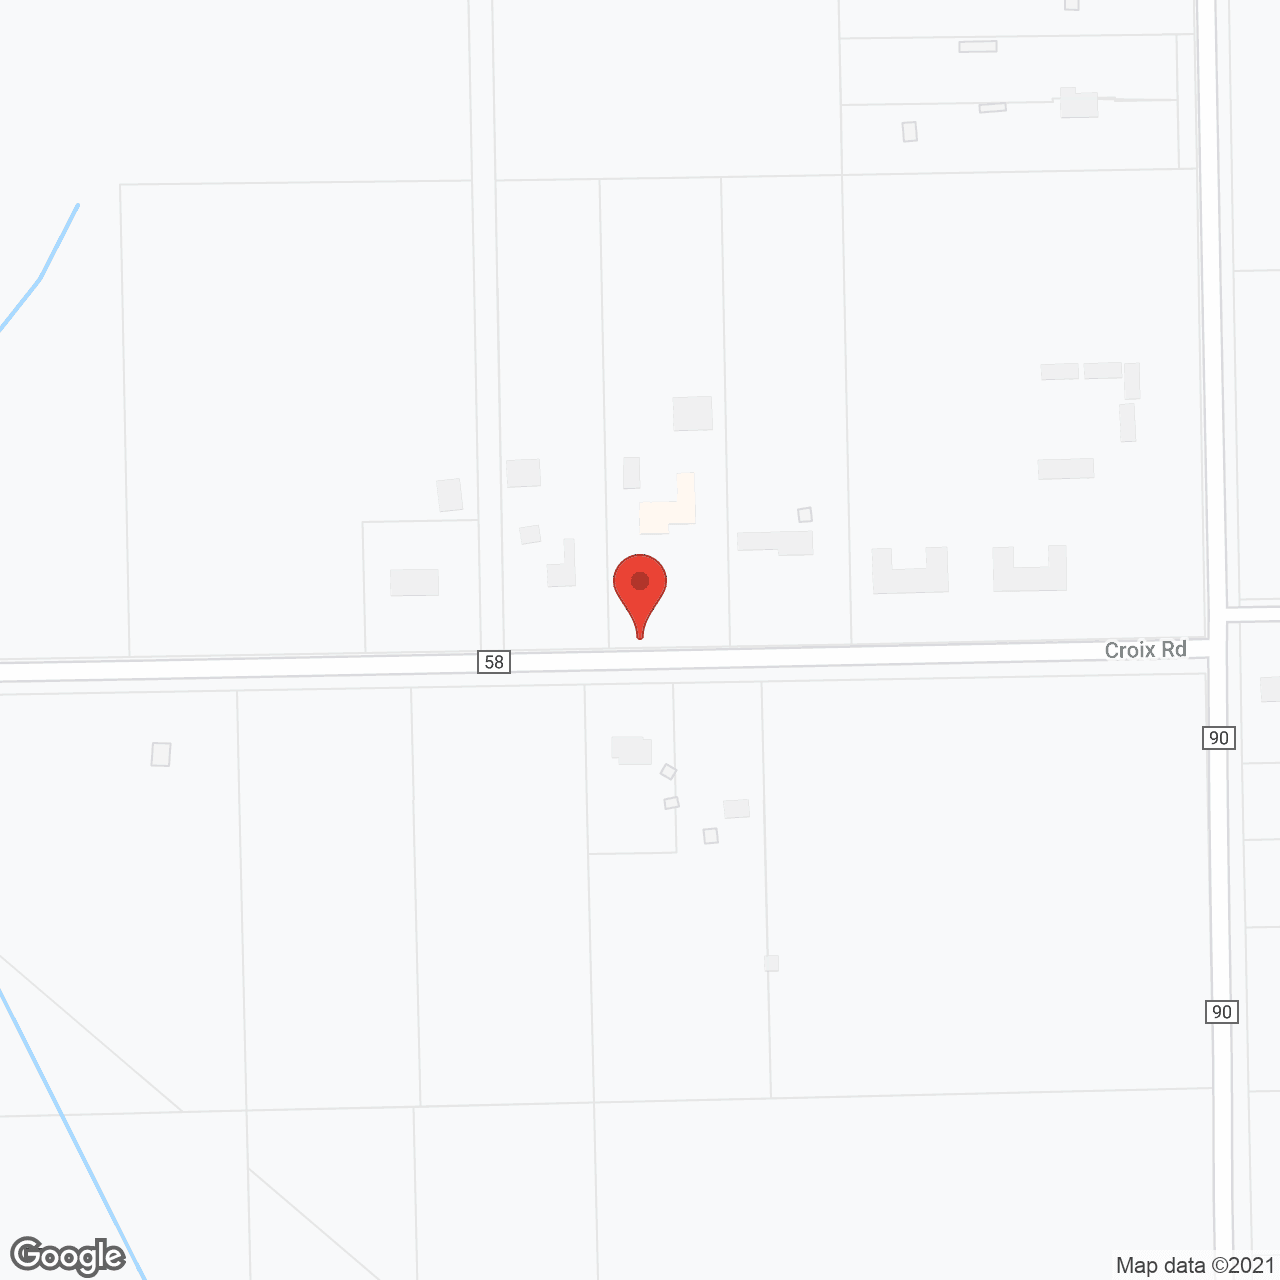 Six Palms in google map